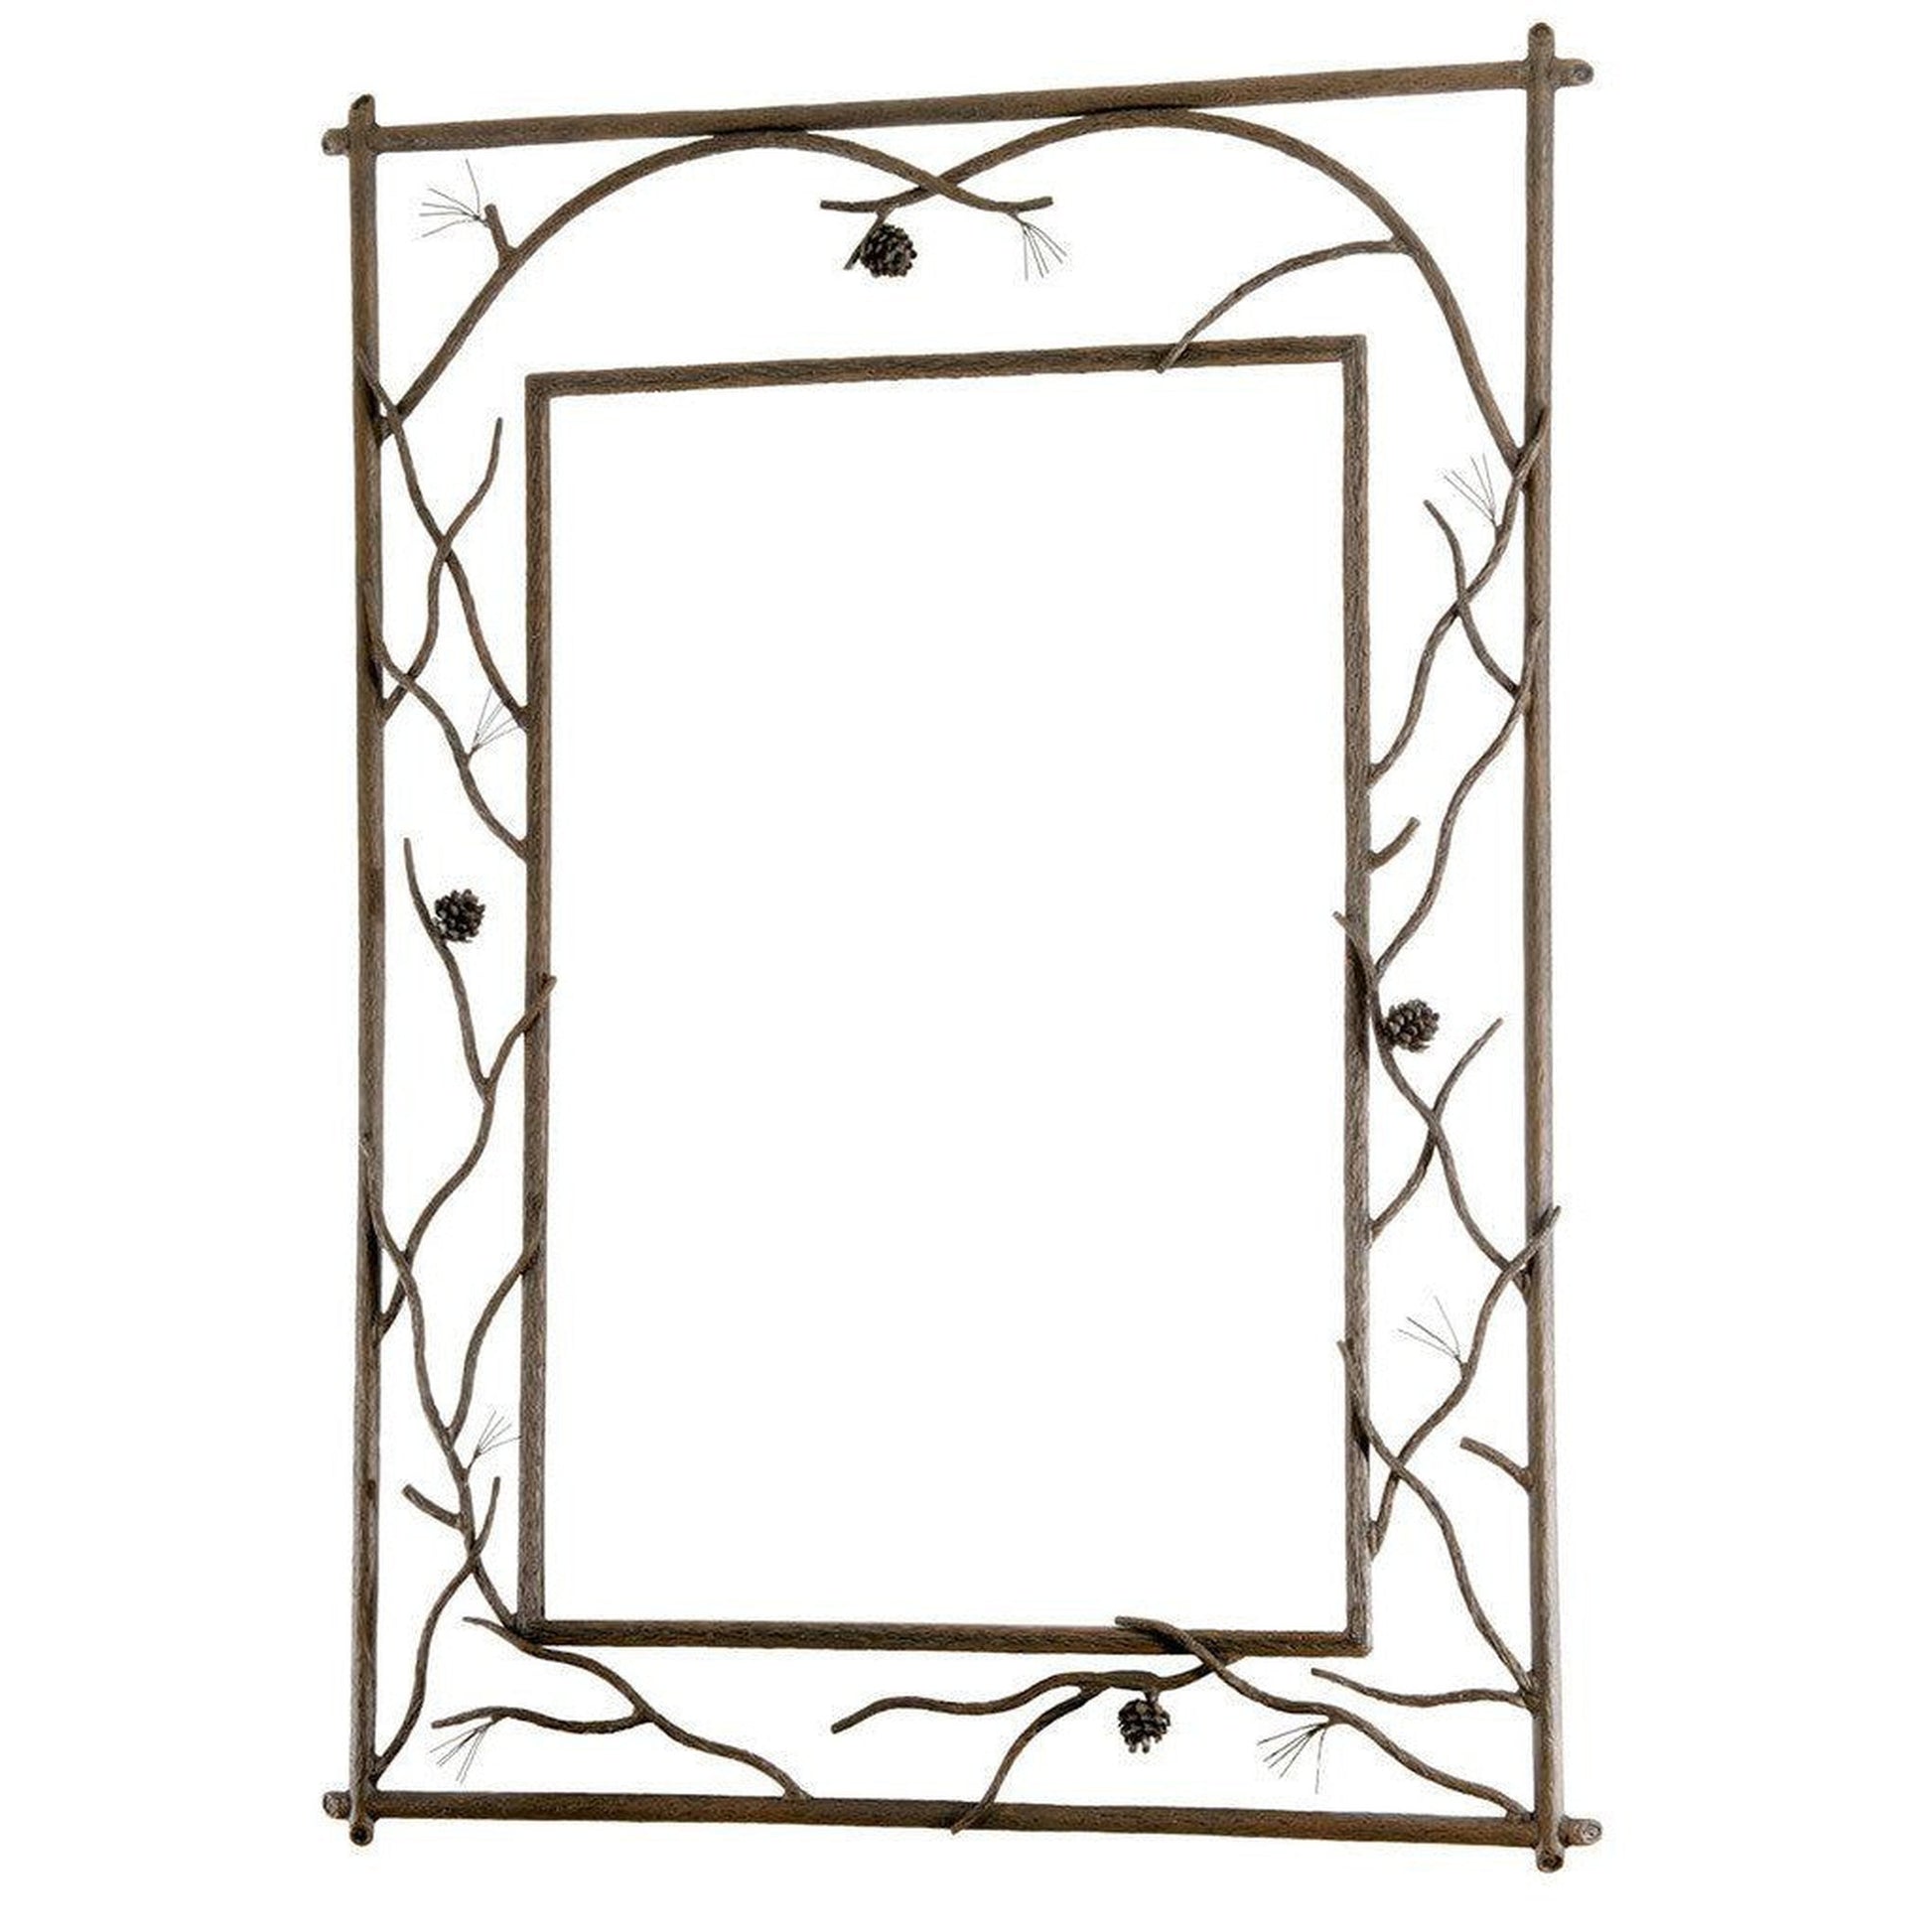 Stone County Ironworks Pine 37" x 51" Large Hand Rubbed Pewter Branched Iron Wall Mirror